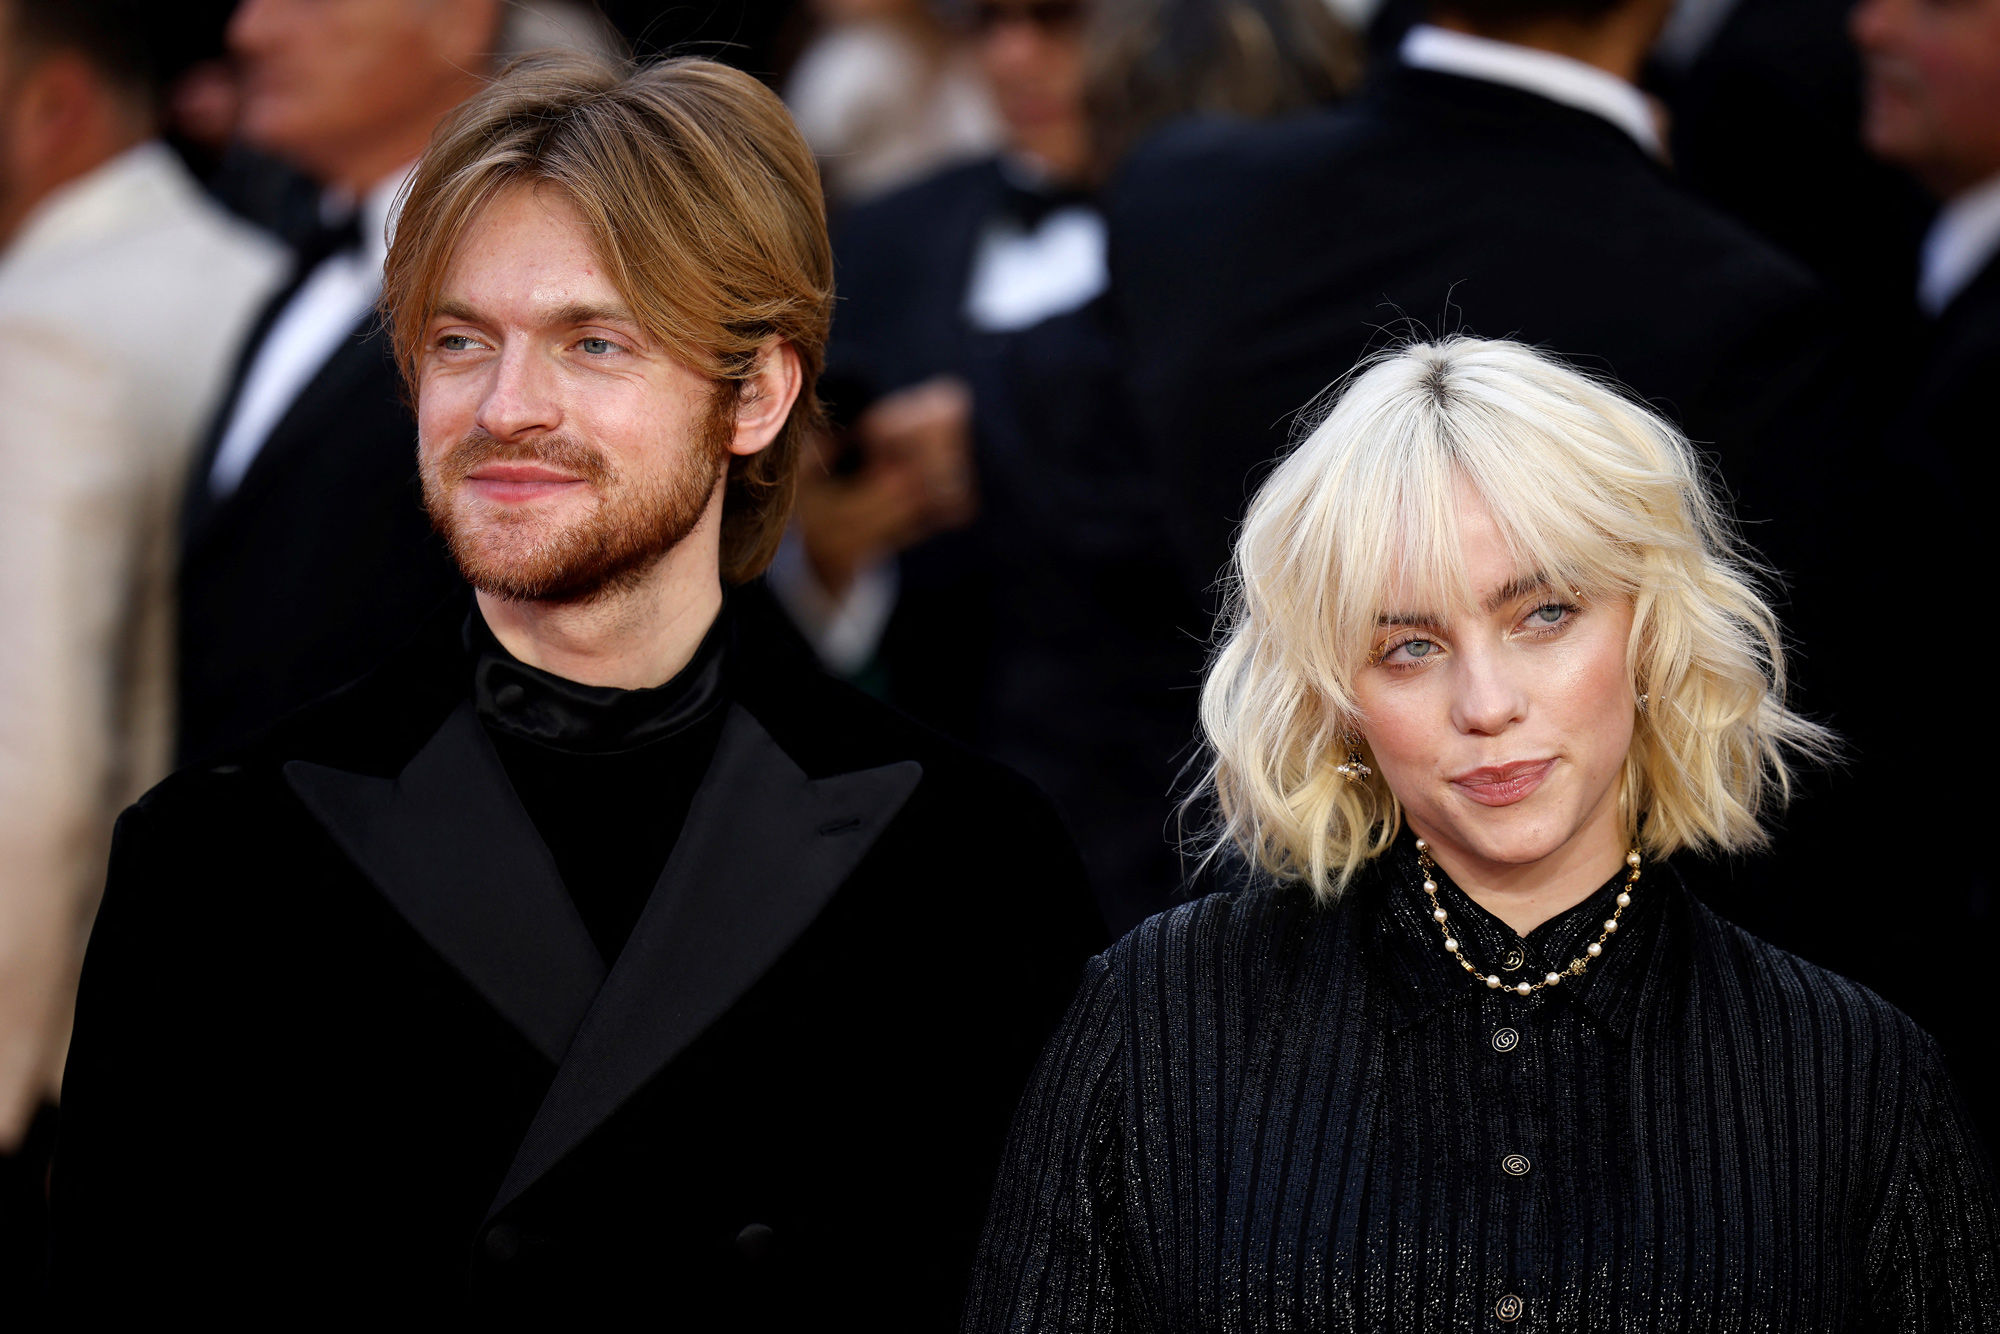 Finneas O'Connell, left, and Billie Eilish pose on the red carpet after arriving to attend the World Premiere of "No Time to Die" at the Royal Albert Hall in London on September 28, 2021.